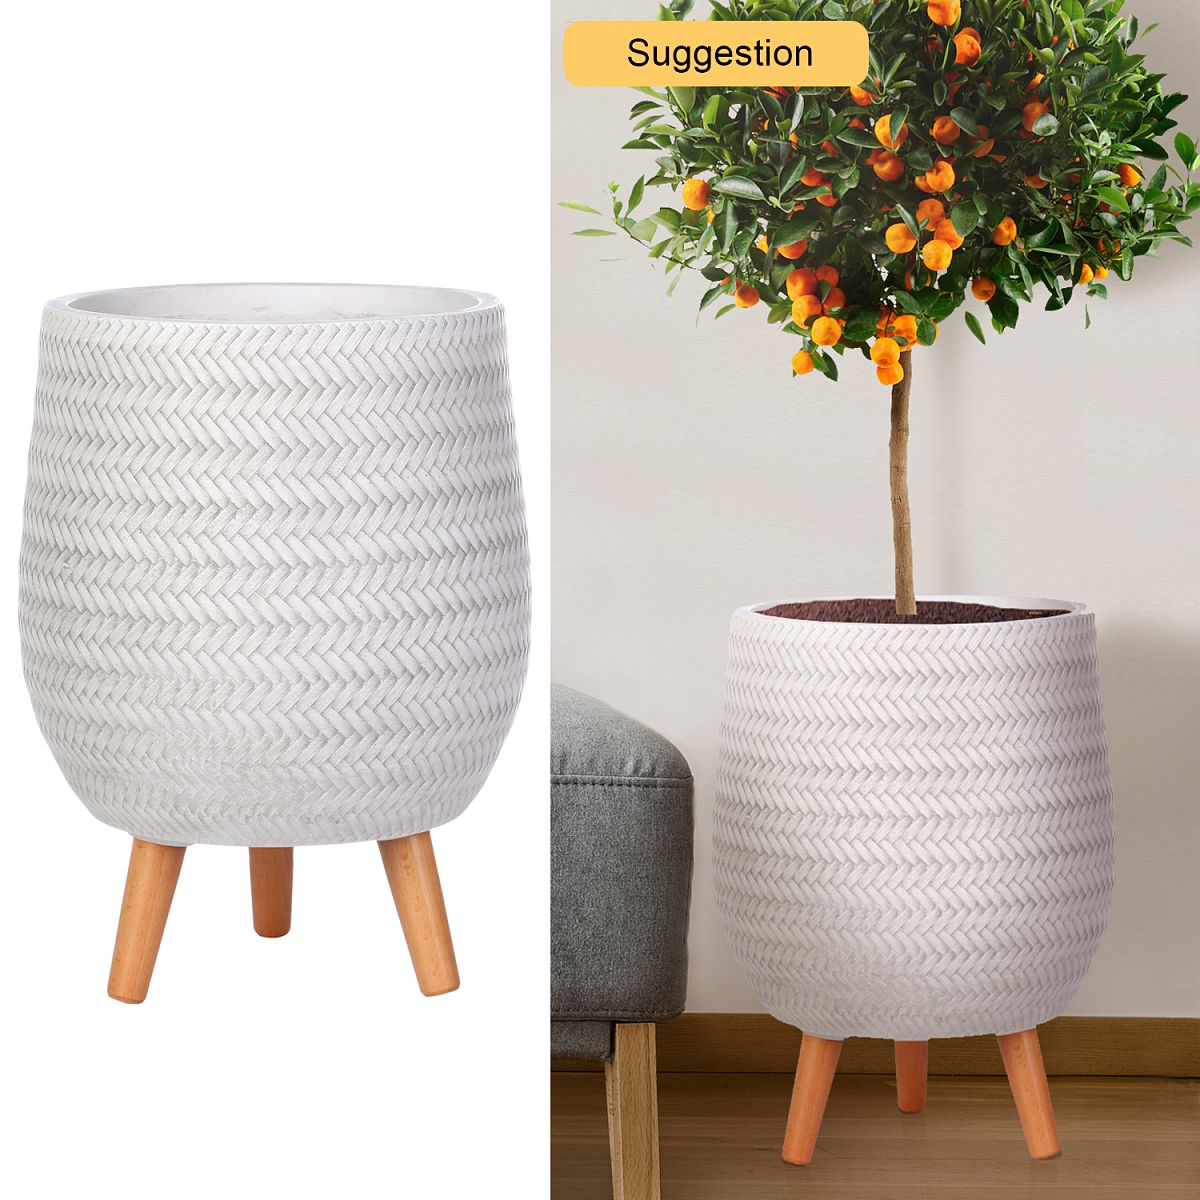 Plaited Style Egg Planter on Legs, Round Pot Plant Stand Indoor by Idealist Lite